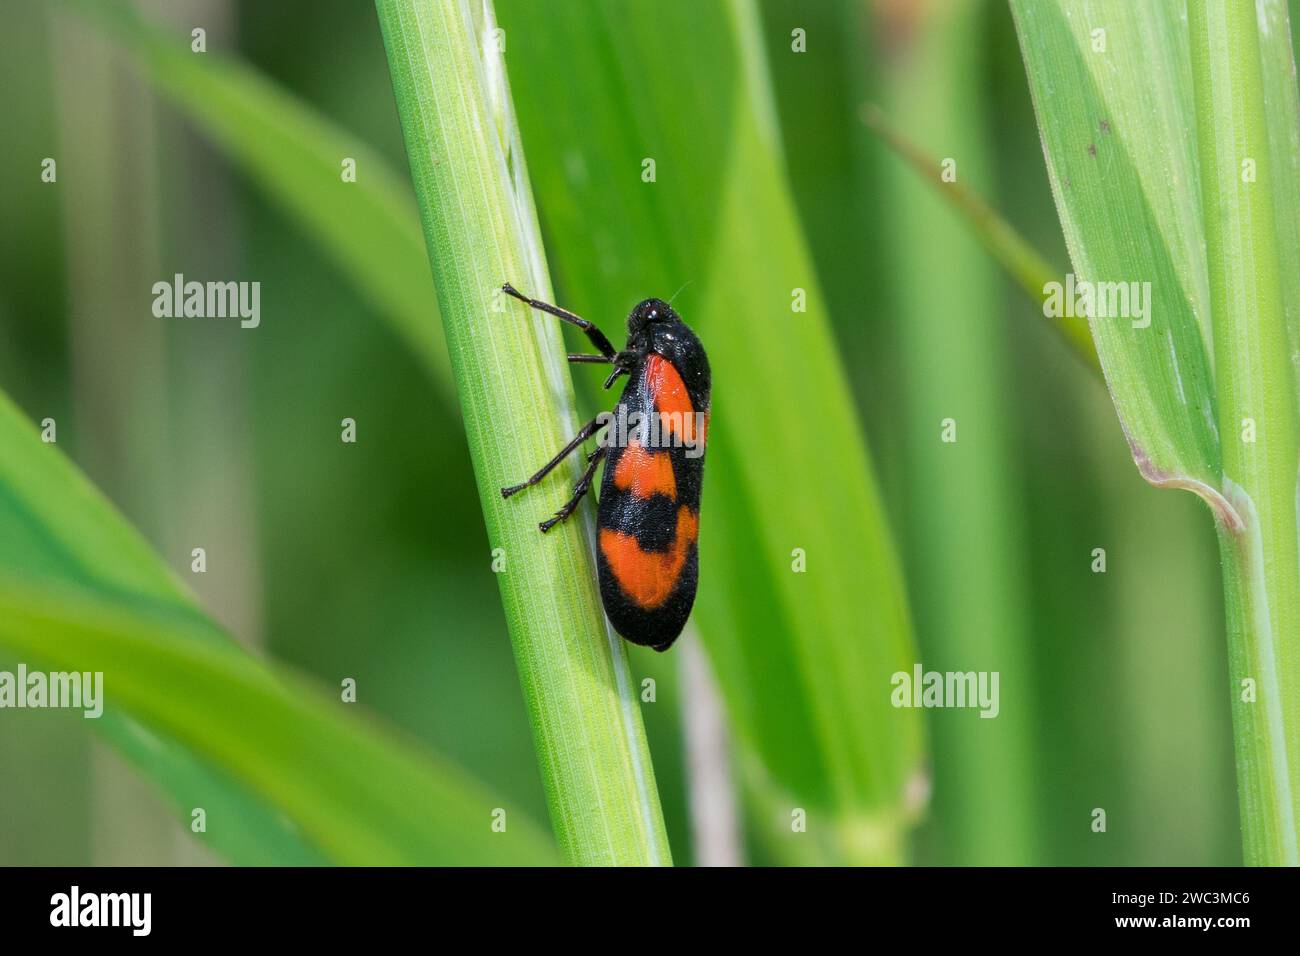 A red and black froghopper (Cercopis vulnerata) clinging to a plant stem. Photographed at Hawthorn near Seaham, County Durham Stock Photo